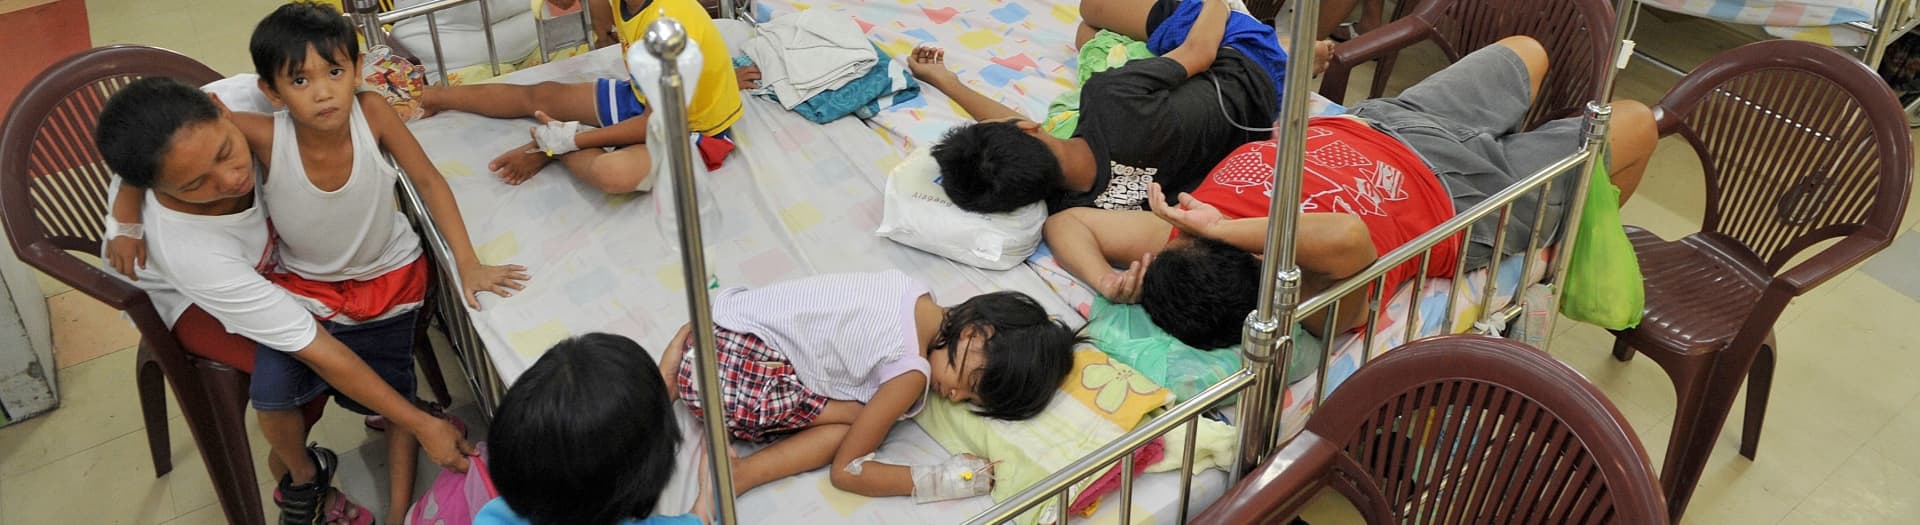 Young victims of an outbreak of dengue fever crowd the children's ward of the government-run Quirino Memorial Hospital in Manila